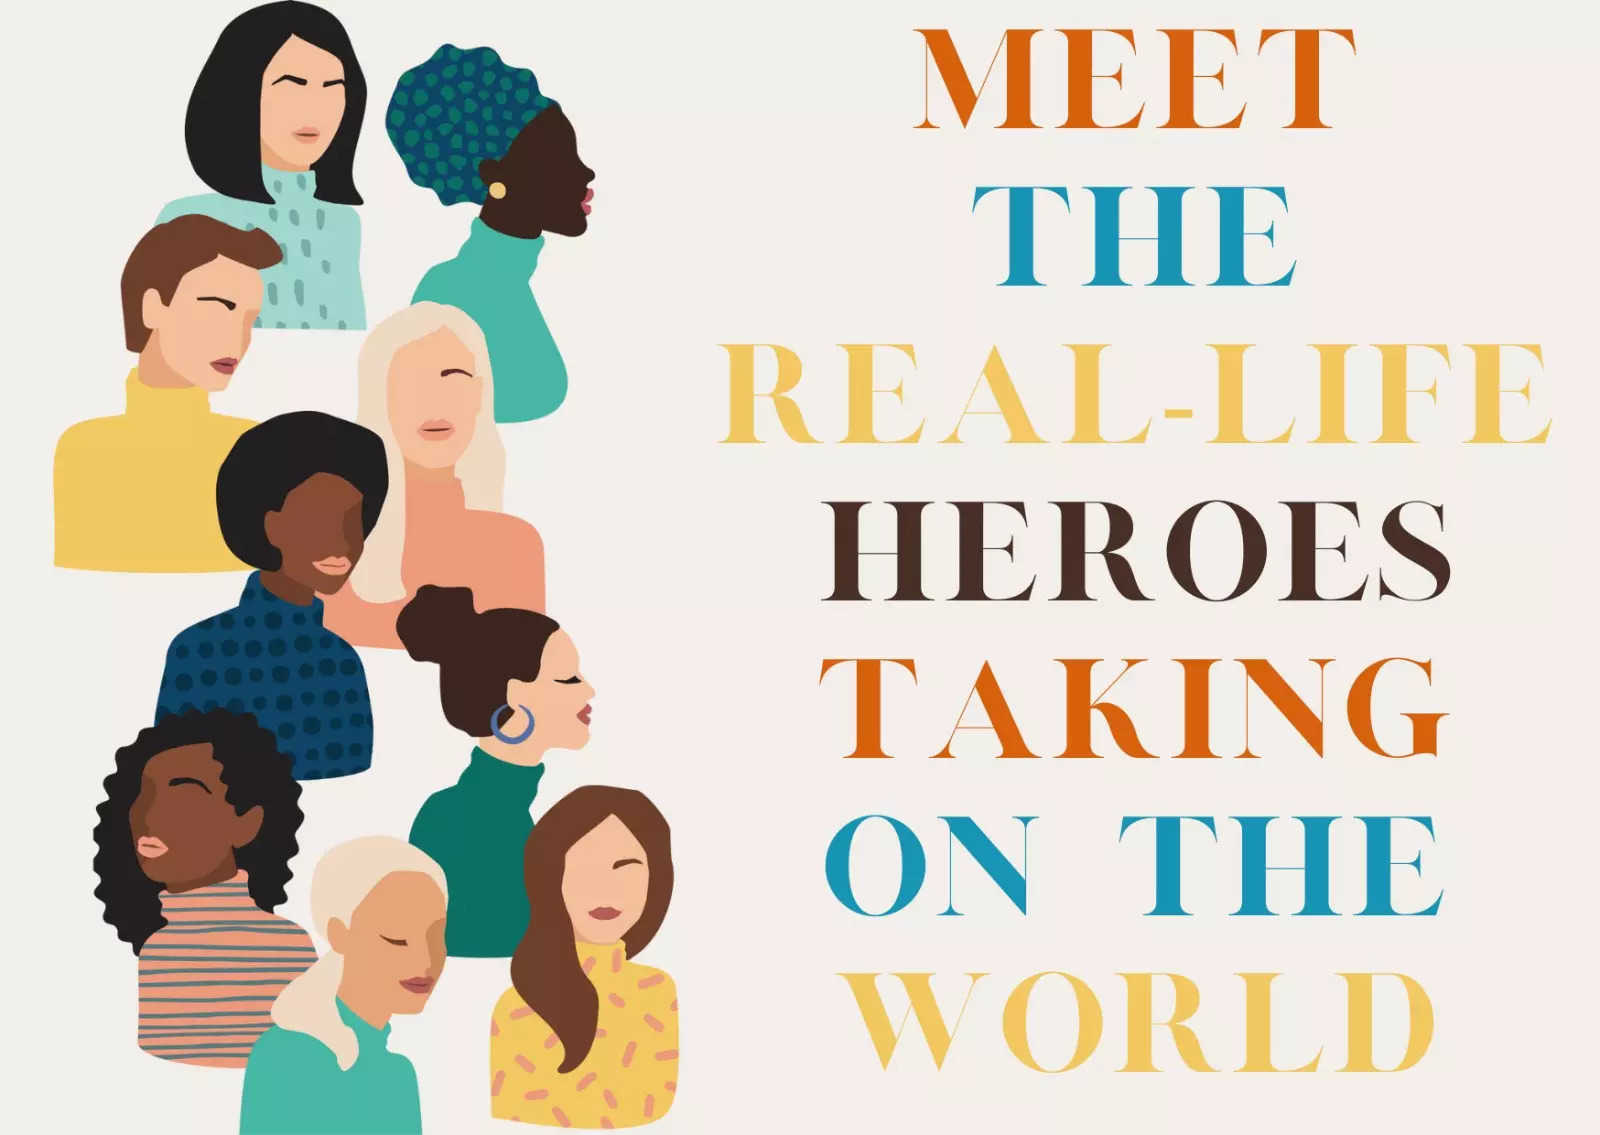 Women's day: Meet the real-life heroes talking on the world 